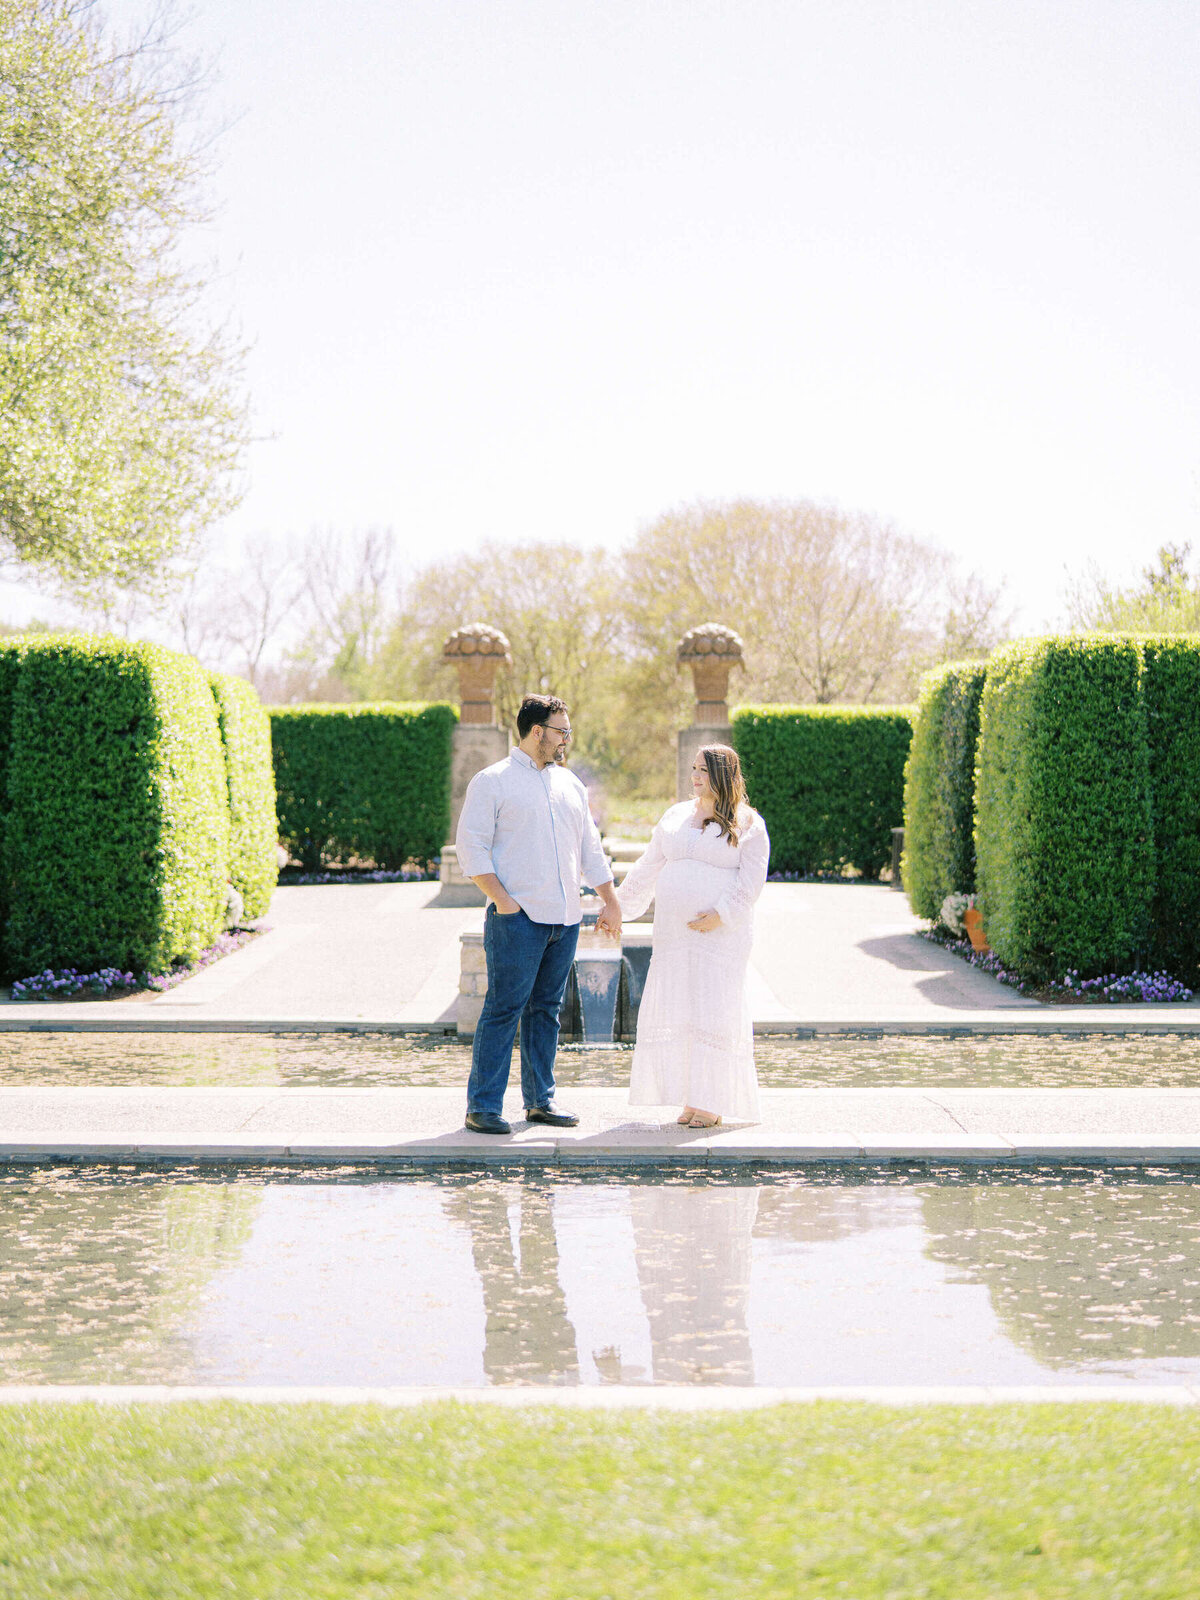 07 Dallas Arboretum Maternity Family Session Kate Panza Photography Kim and Nic